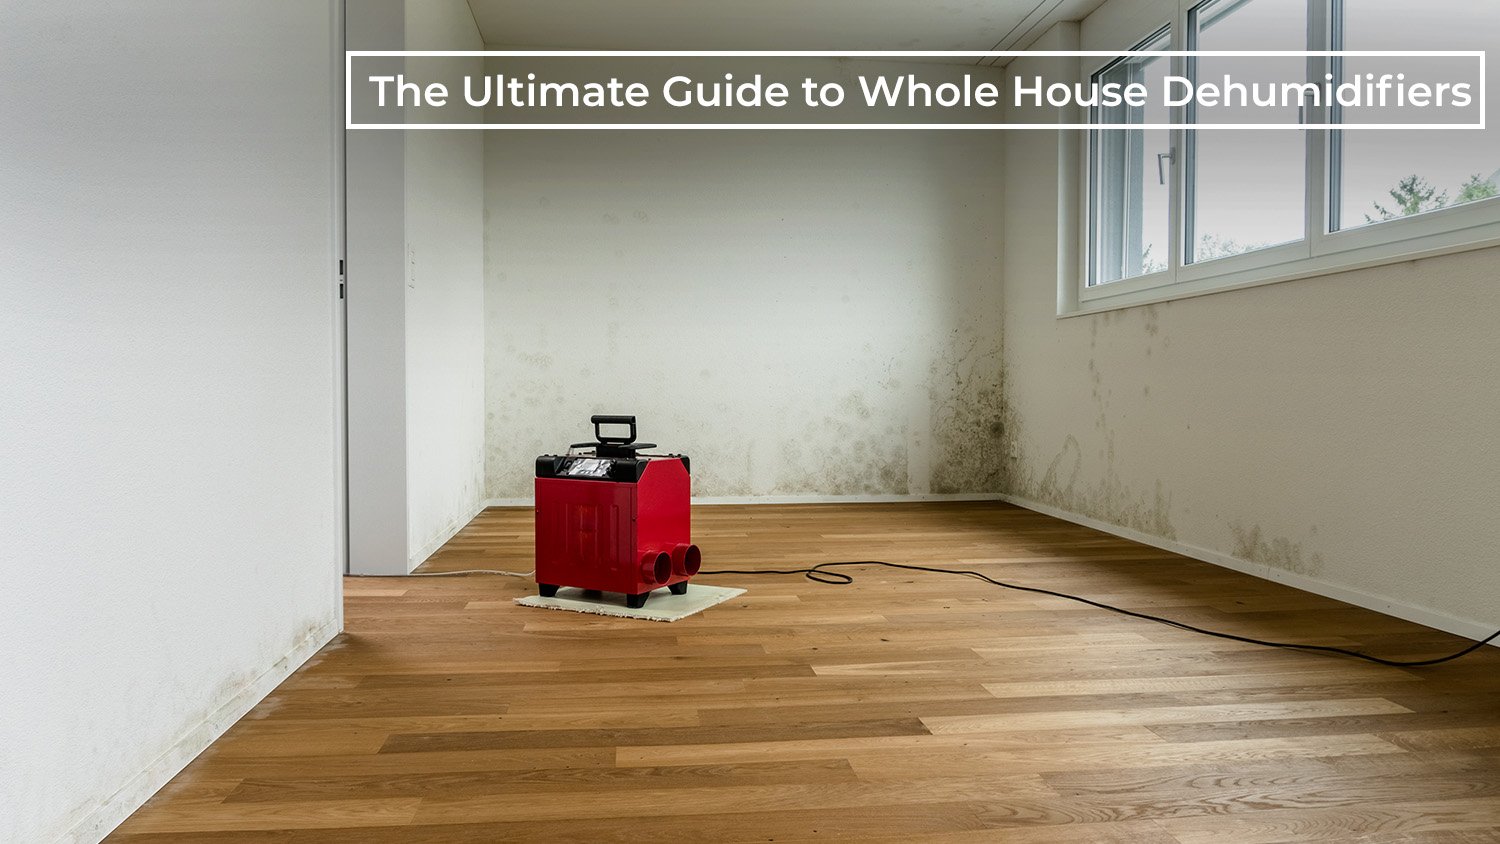 The Ultimate Guide to Whole House Dehumidifiers: How They Work, Benefits, and More